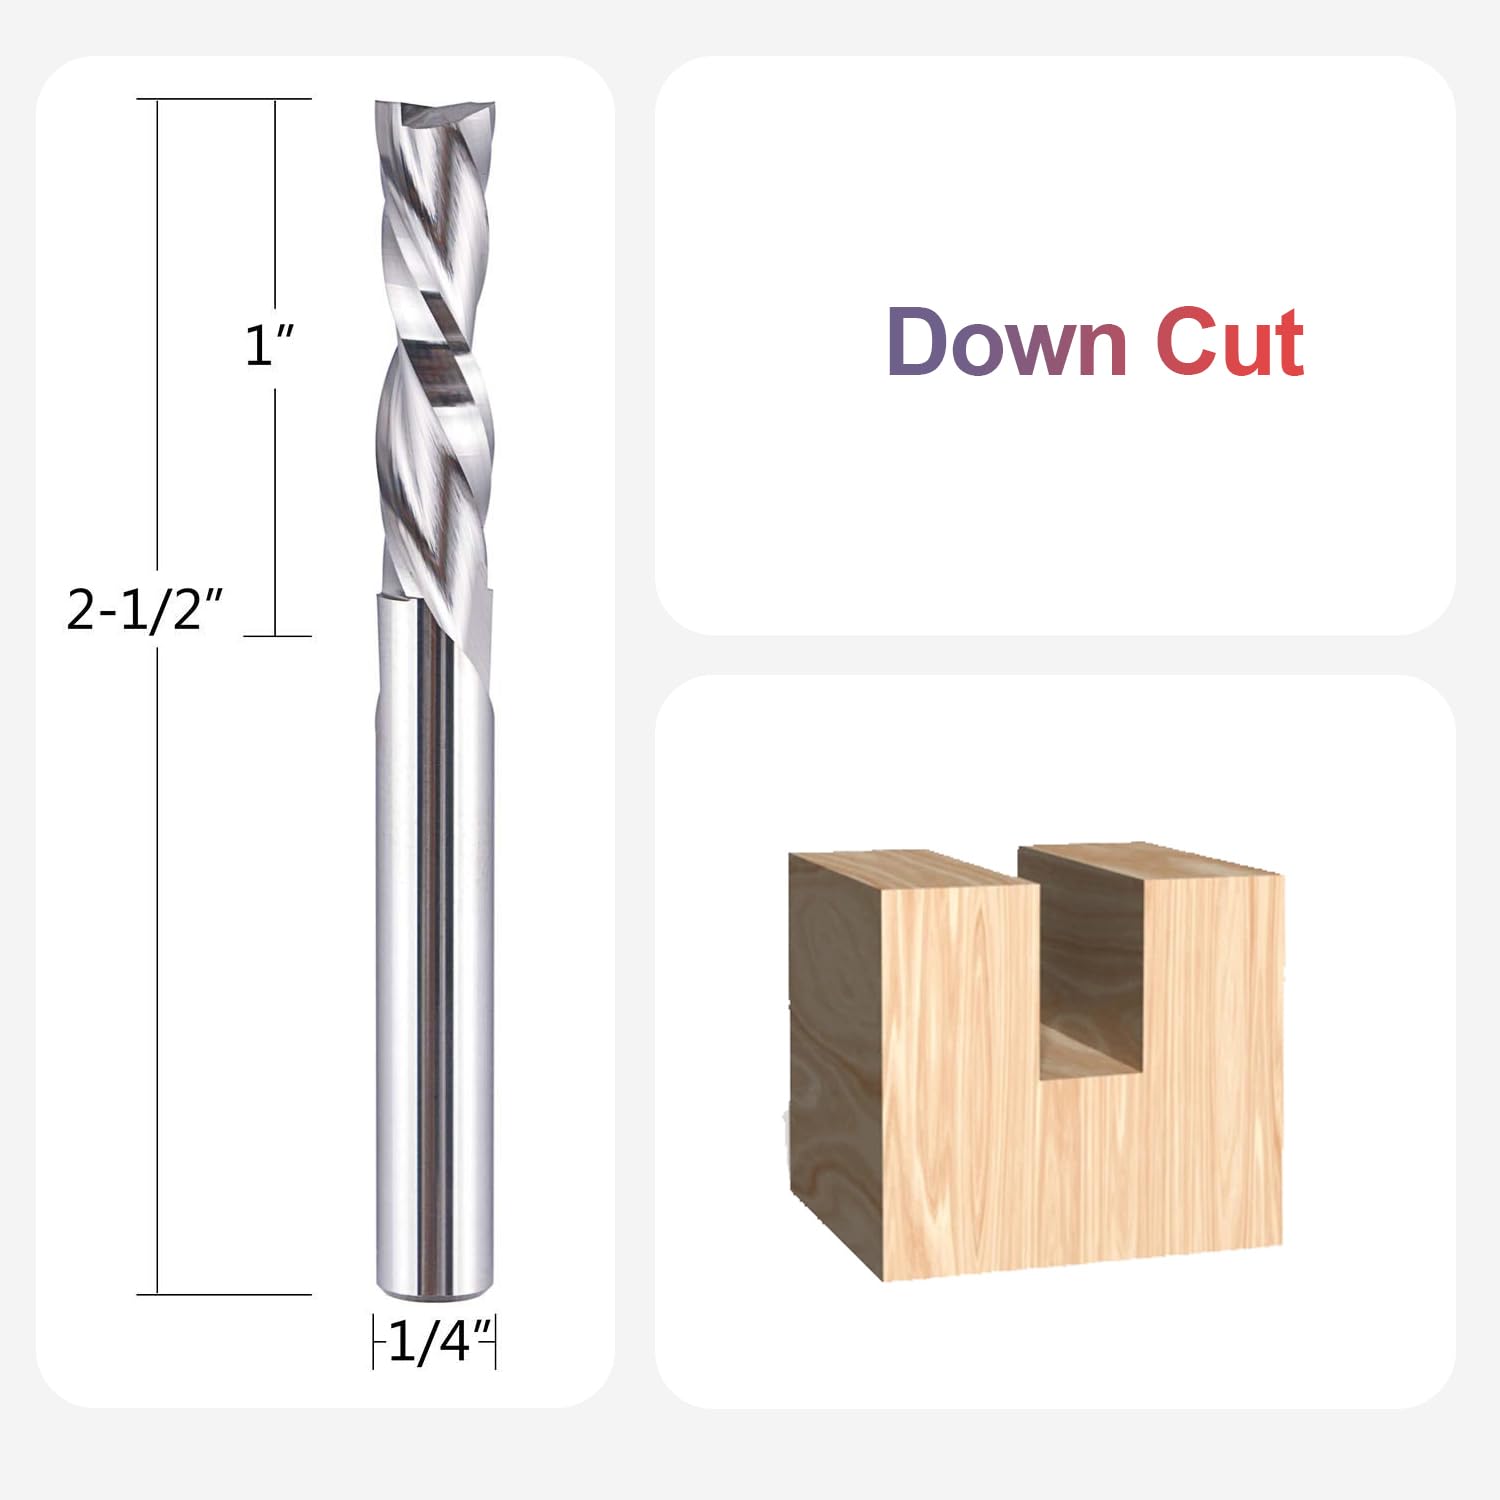 SpeTool 5PCS Spiral Downcut Router Bits 1/4" Shank 1" Cutting Length Solid Carbide CNC Router Bit Set End Mills for Plunge Router Wood Carving